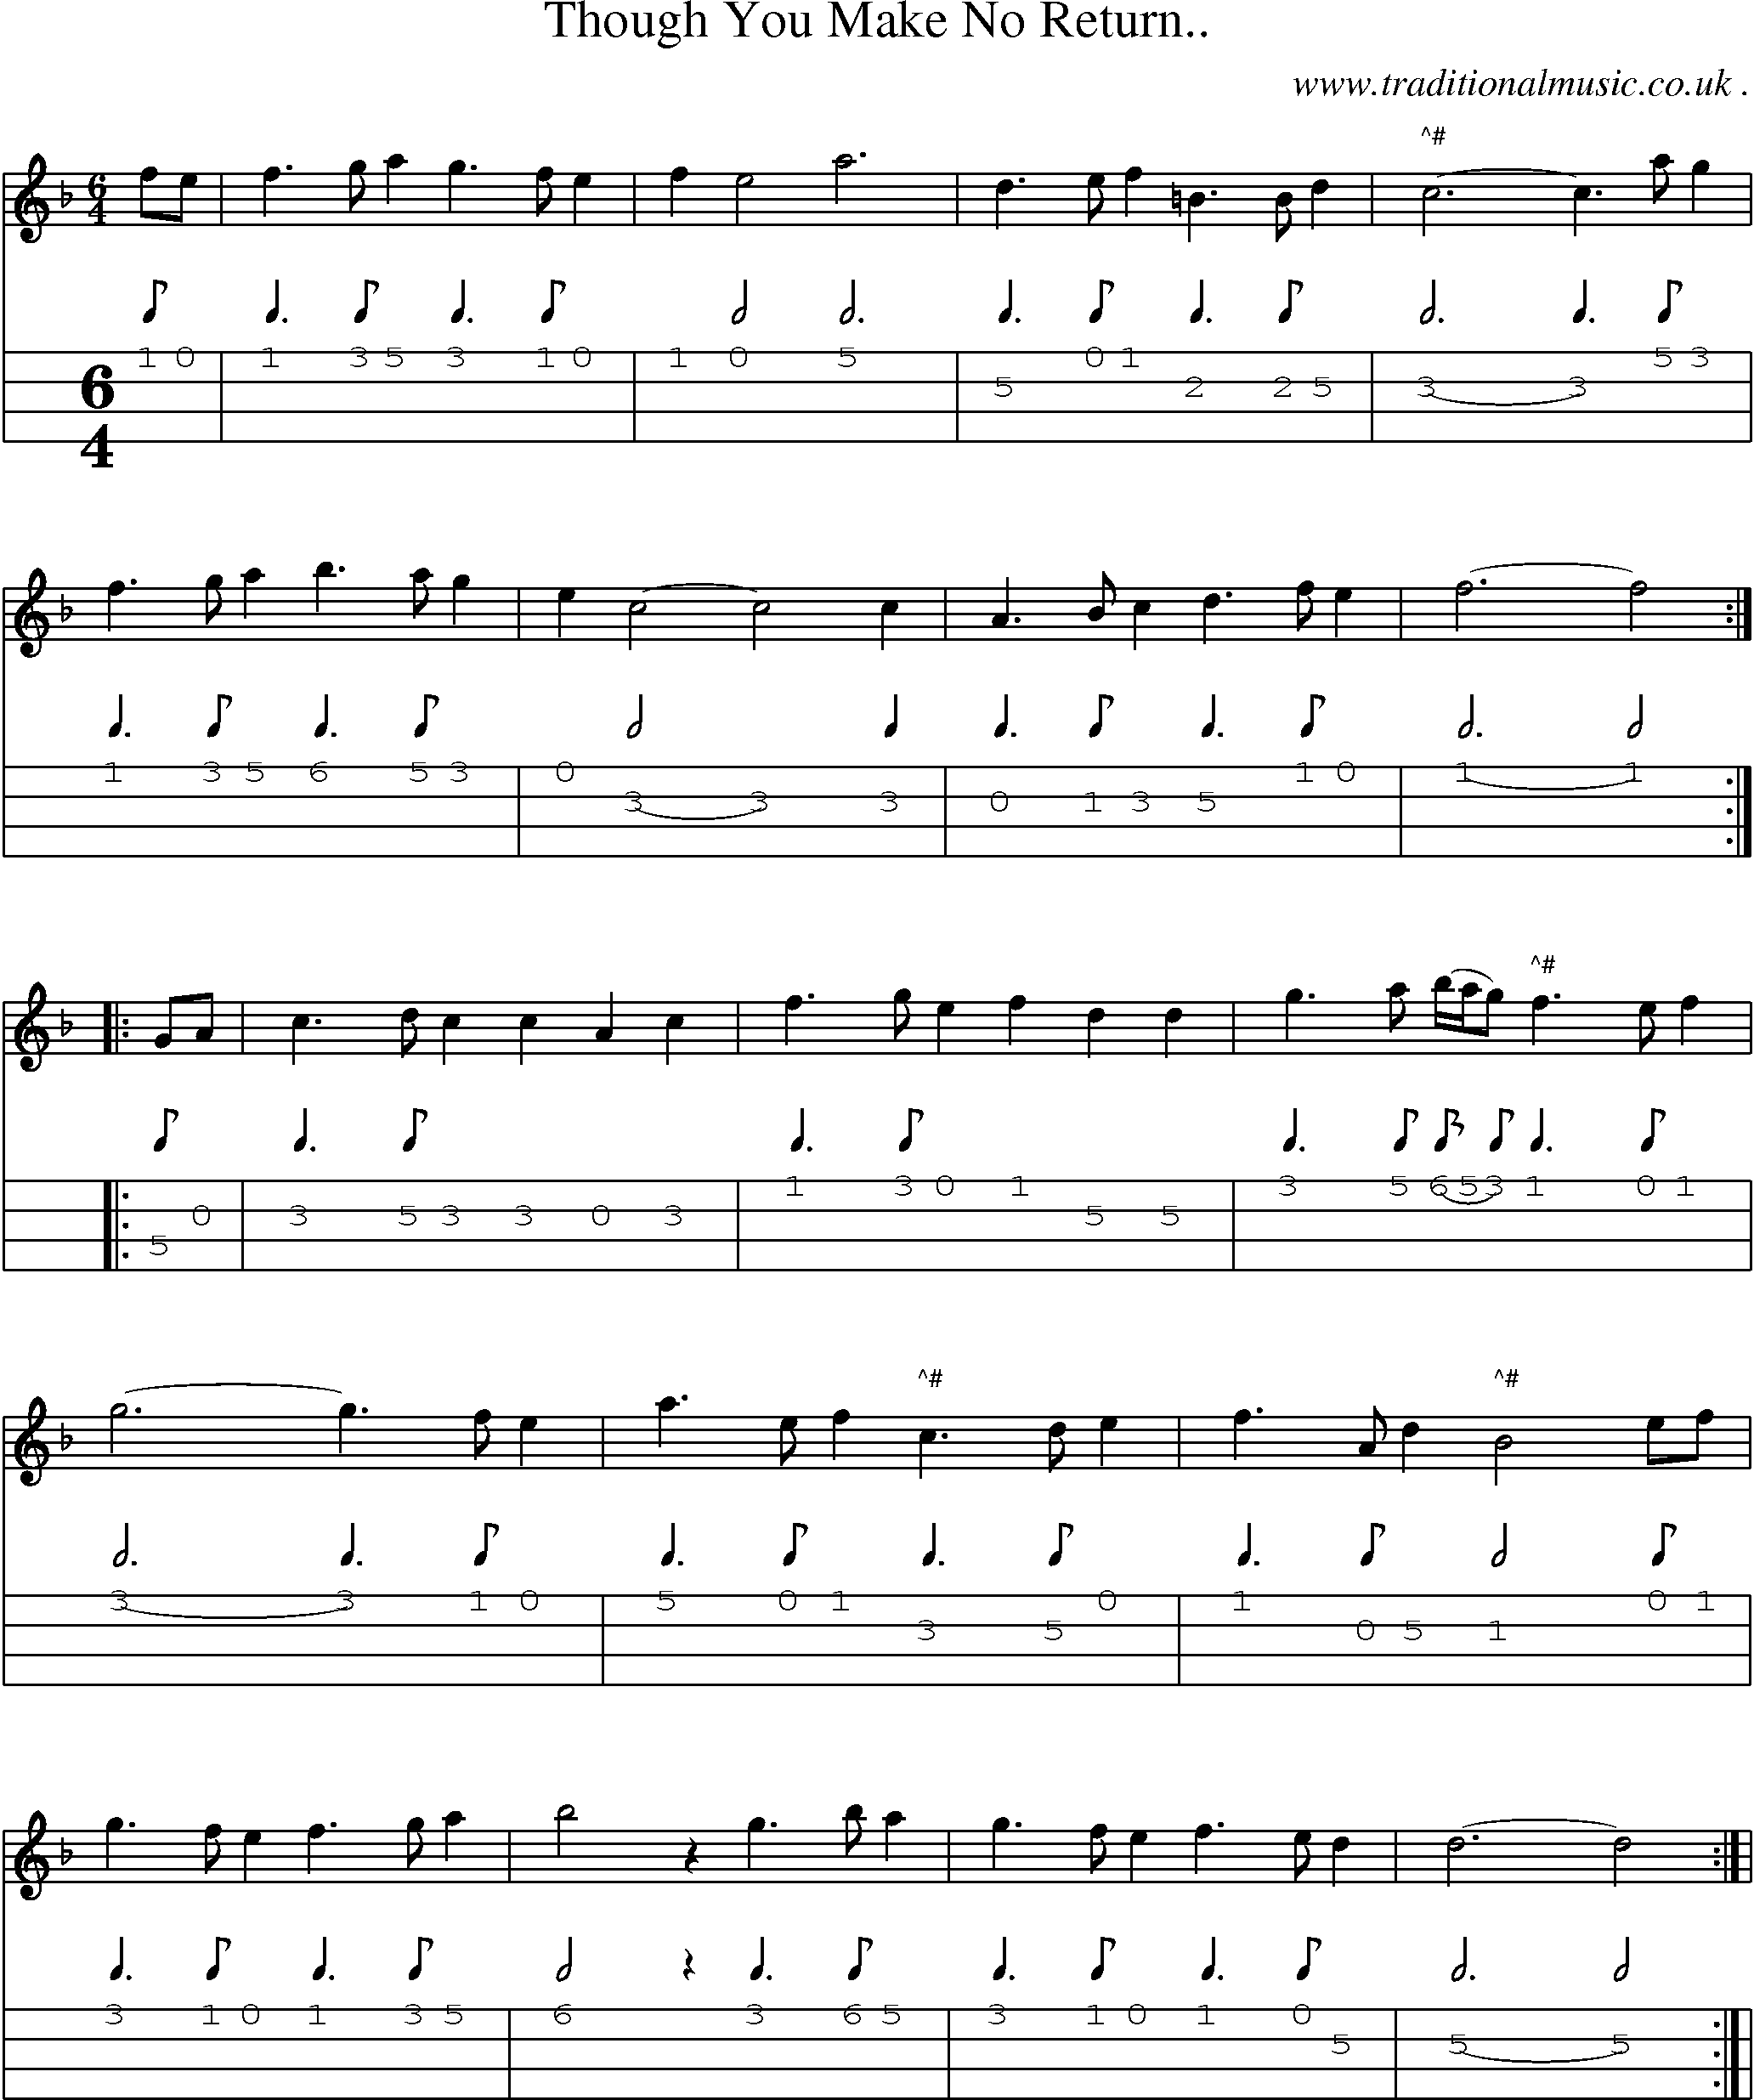 Sheet-Music and Mandolin Tabs for Though You Make No Return